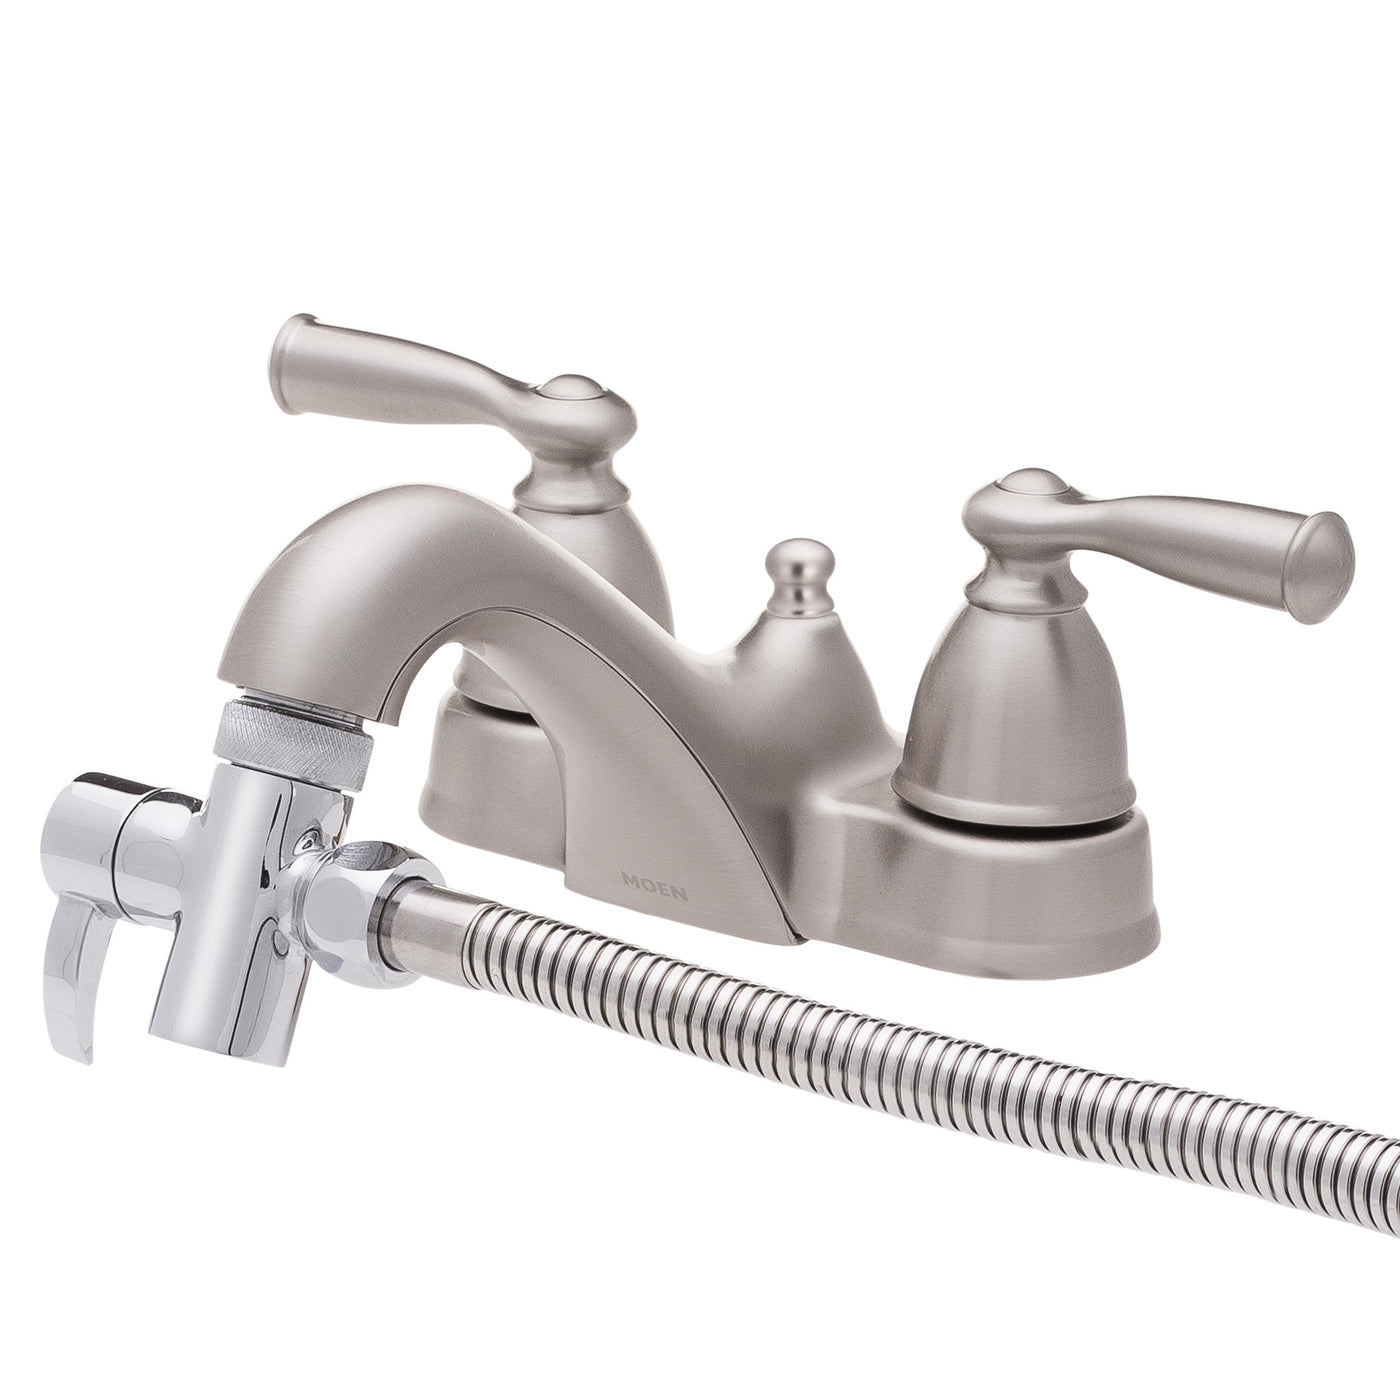 SmarterFresh Faucet Diverter Valve With Aerator and Male Threaded